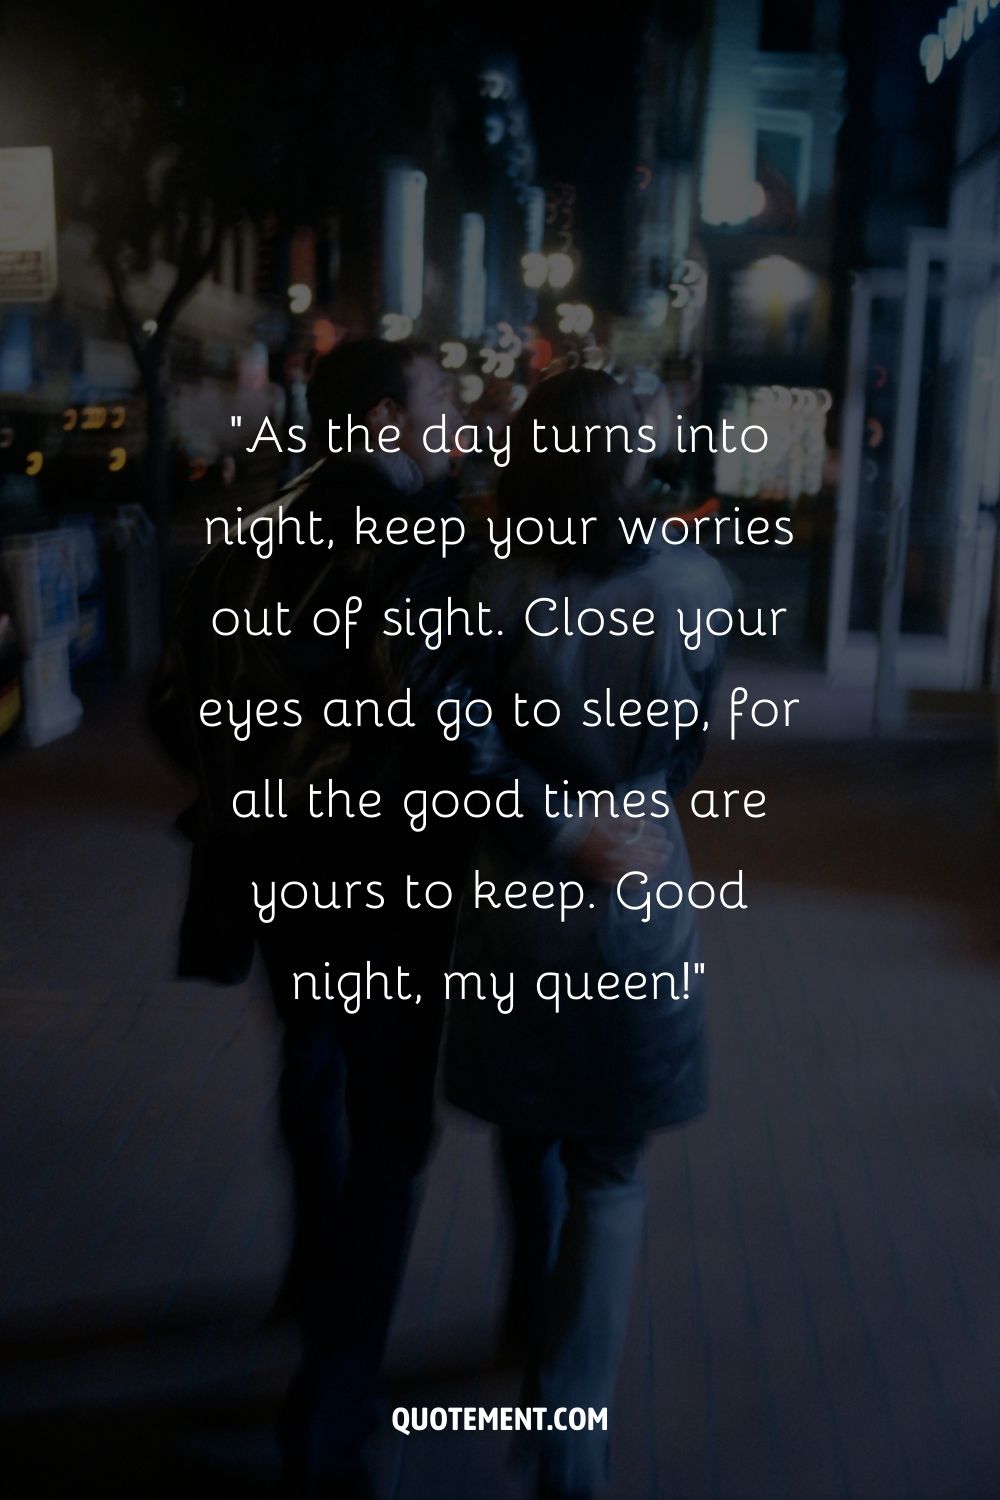 A blurred image of a couple walking at night with city lights in the background